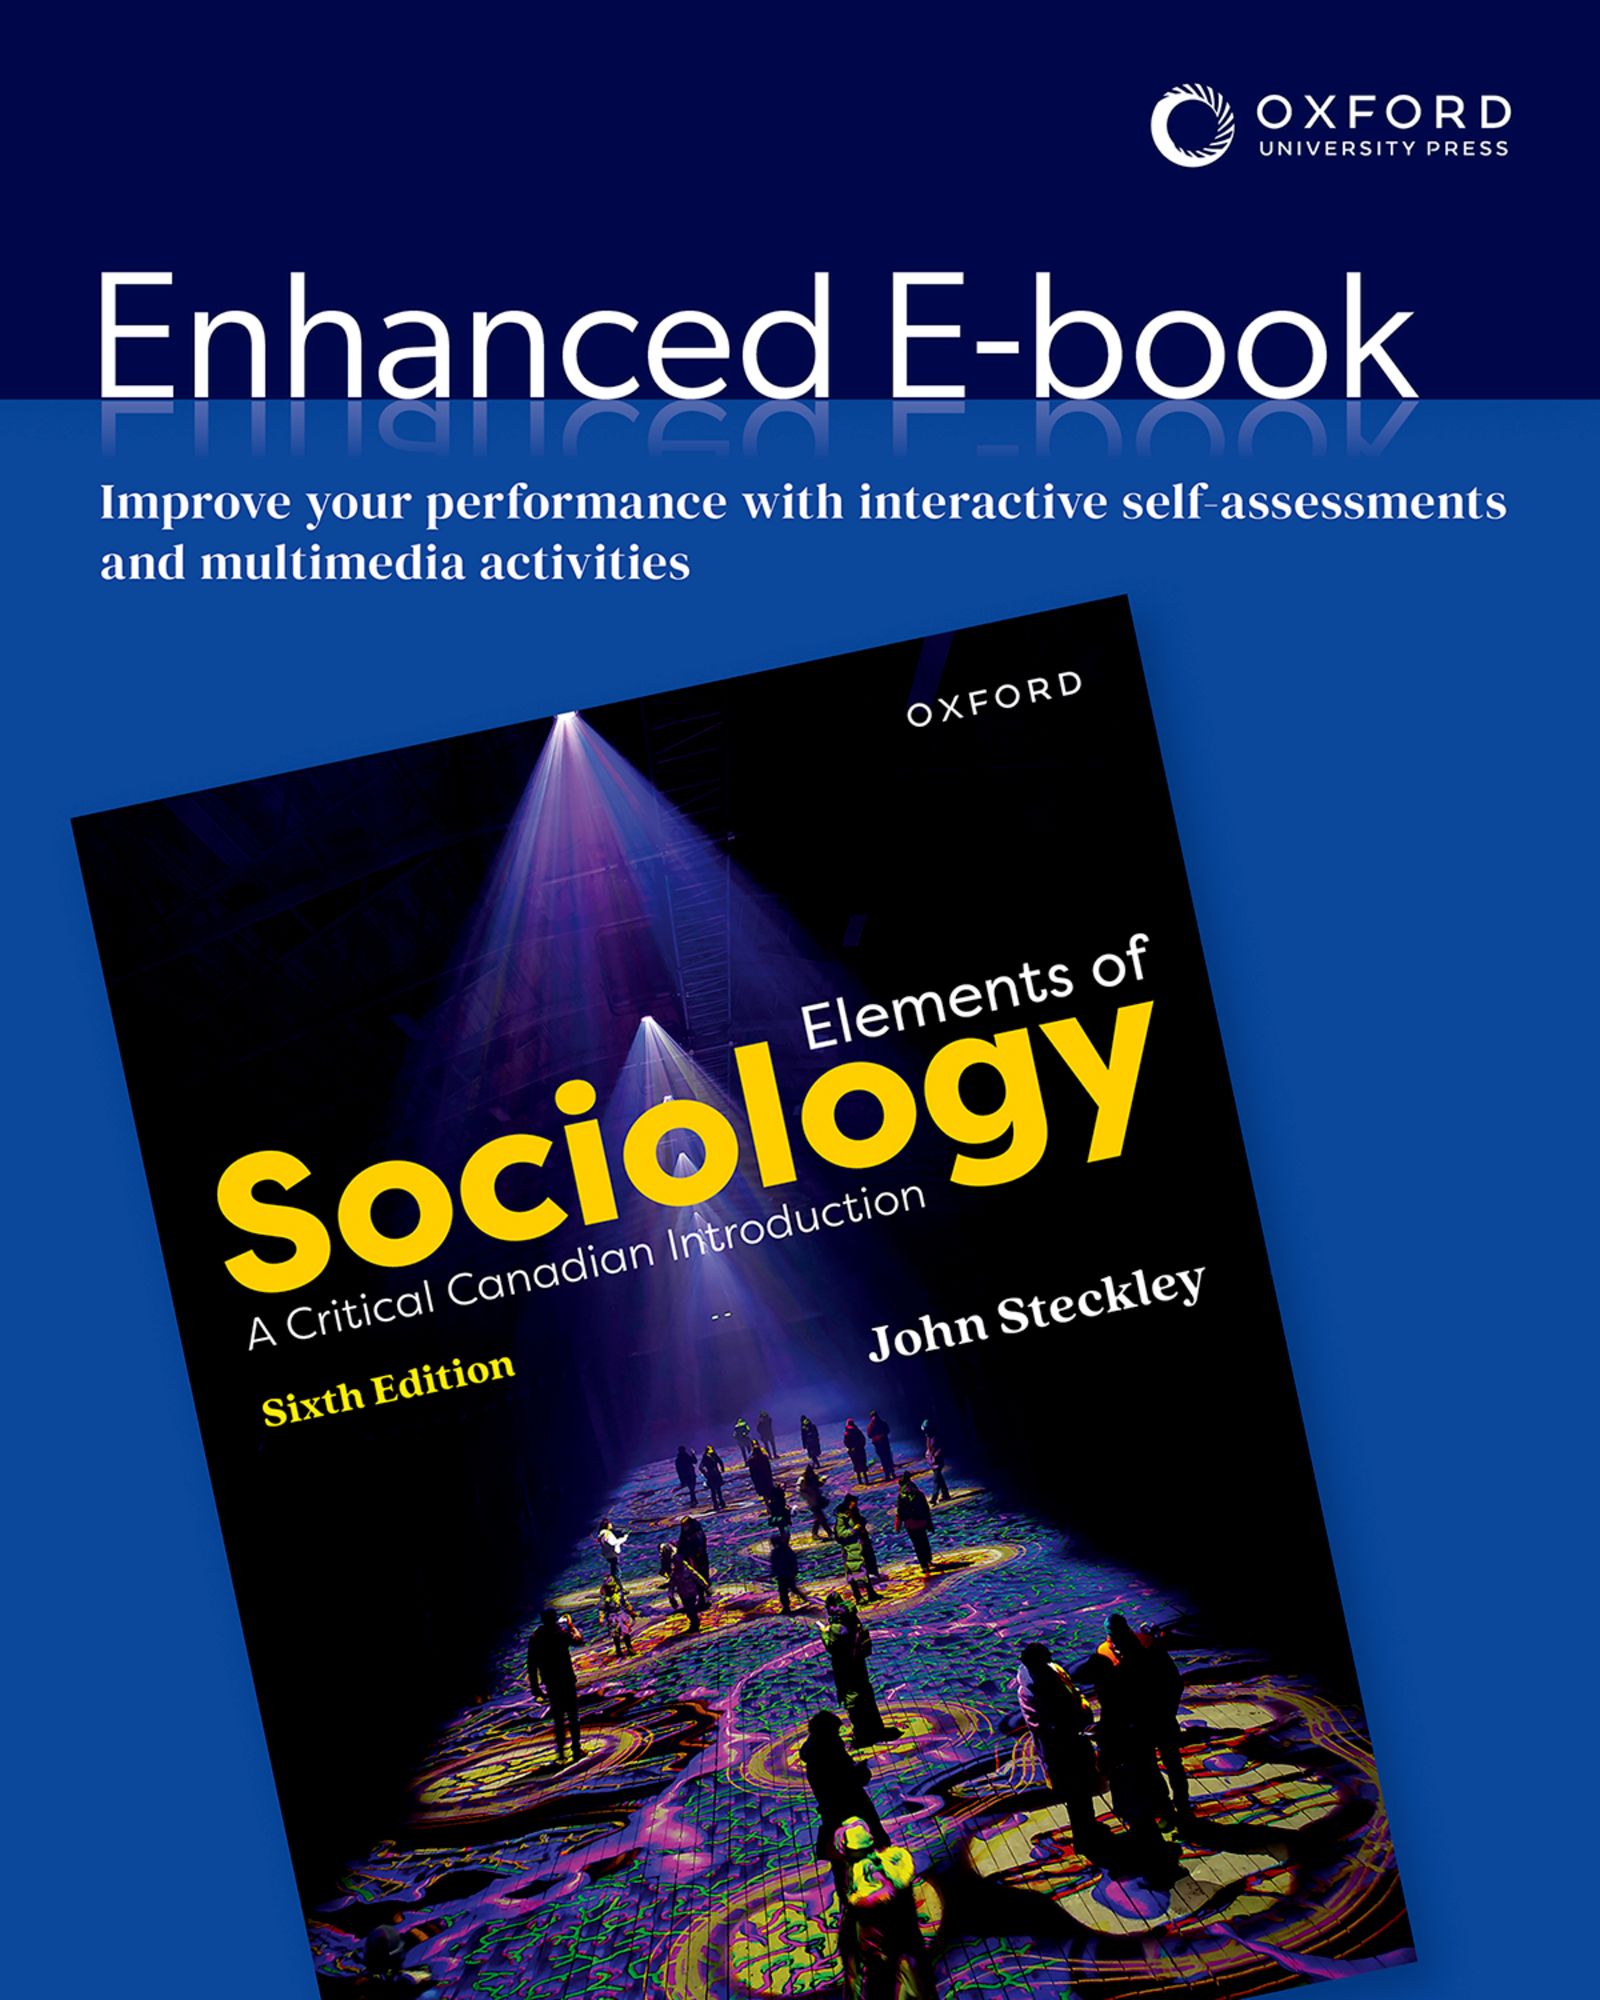 180 Day Access Elements of Sociology